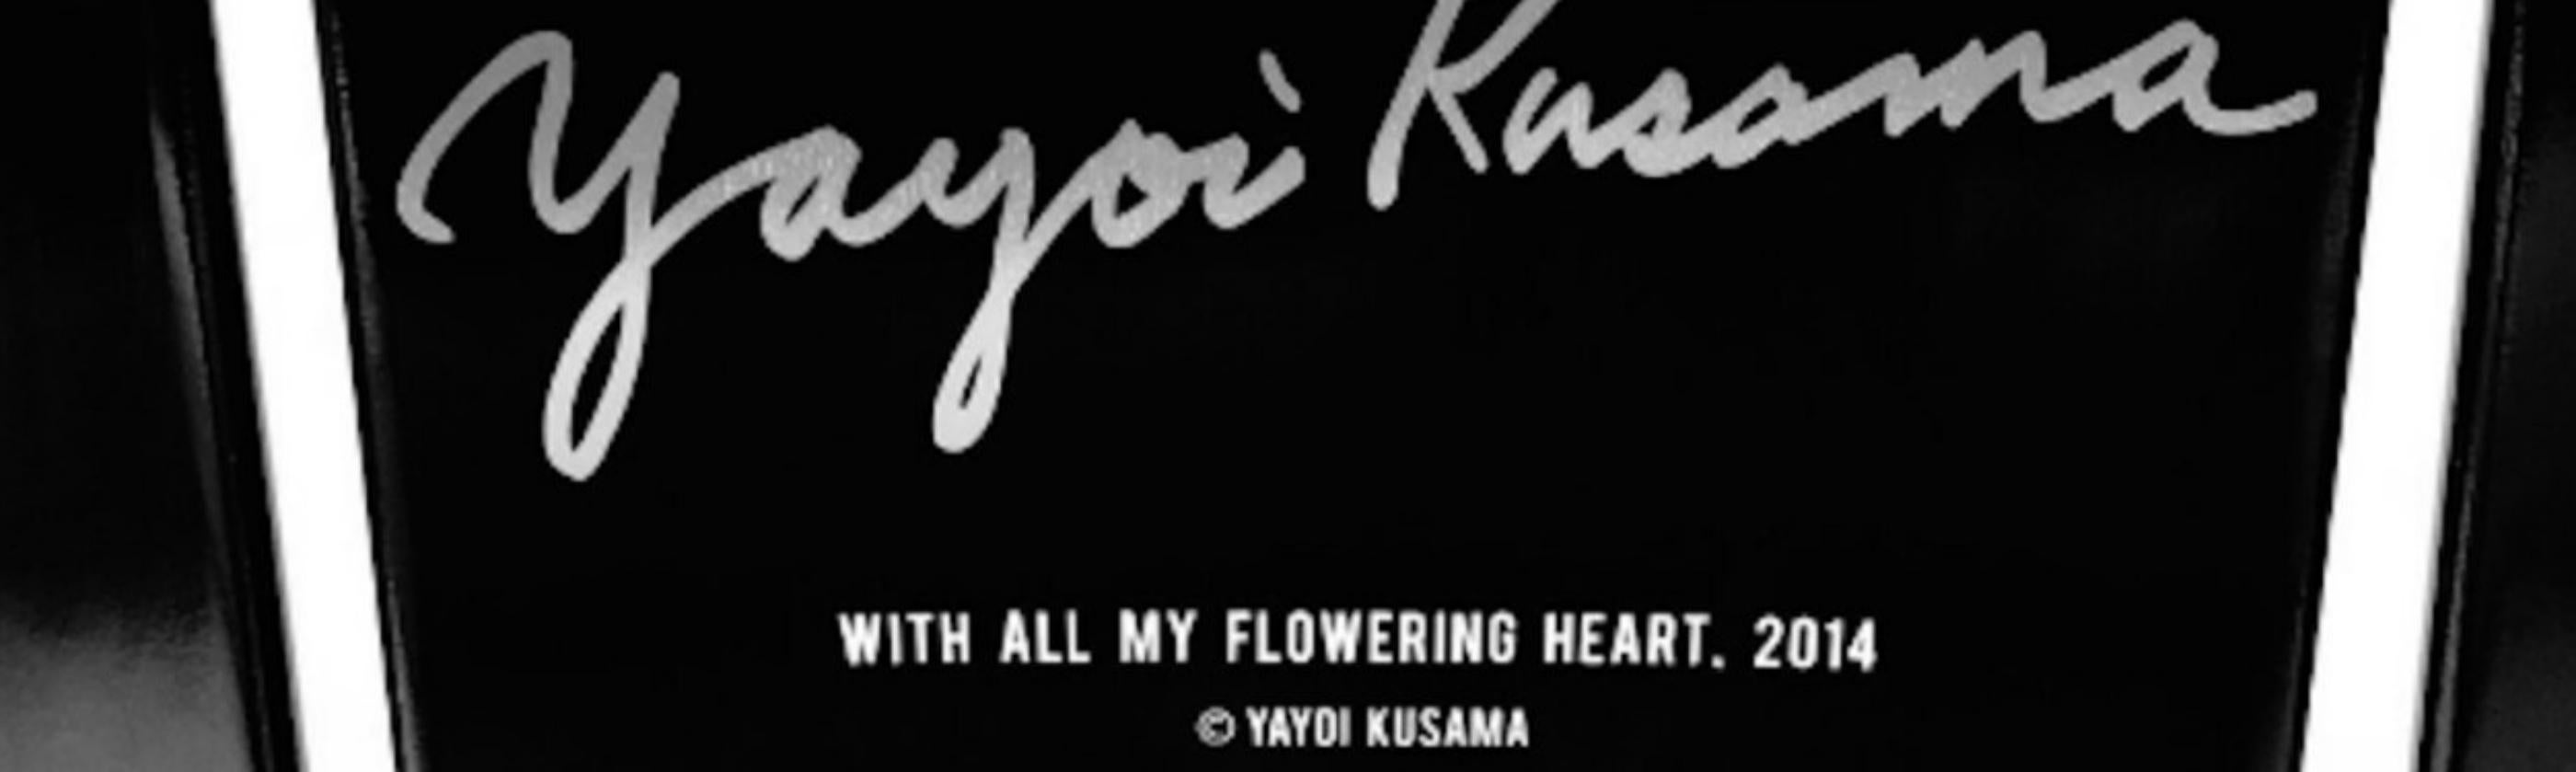 Yayoi Kusama
With All My Flowering Heart (Triptych), 2014
Set of Three (3) Separate Limited Edition numbered skate decks on 7-ply Canadian maple wood
31 × 8 × 2/5 inches (each)
Authorized printed (plate) signature; individually numbered from the